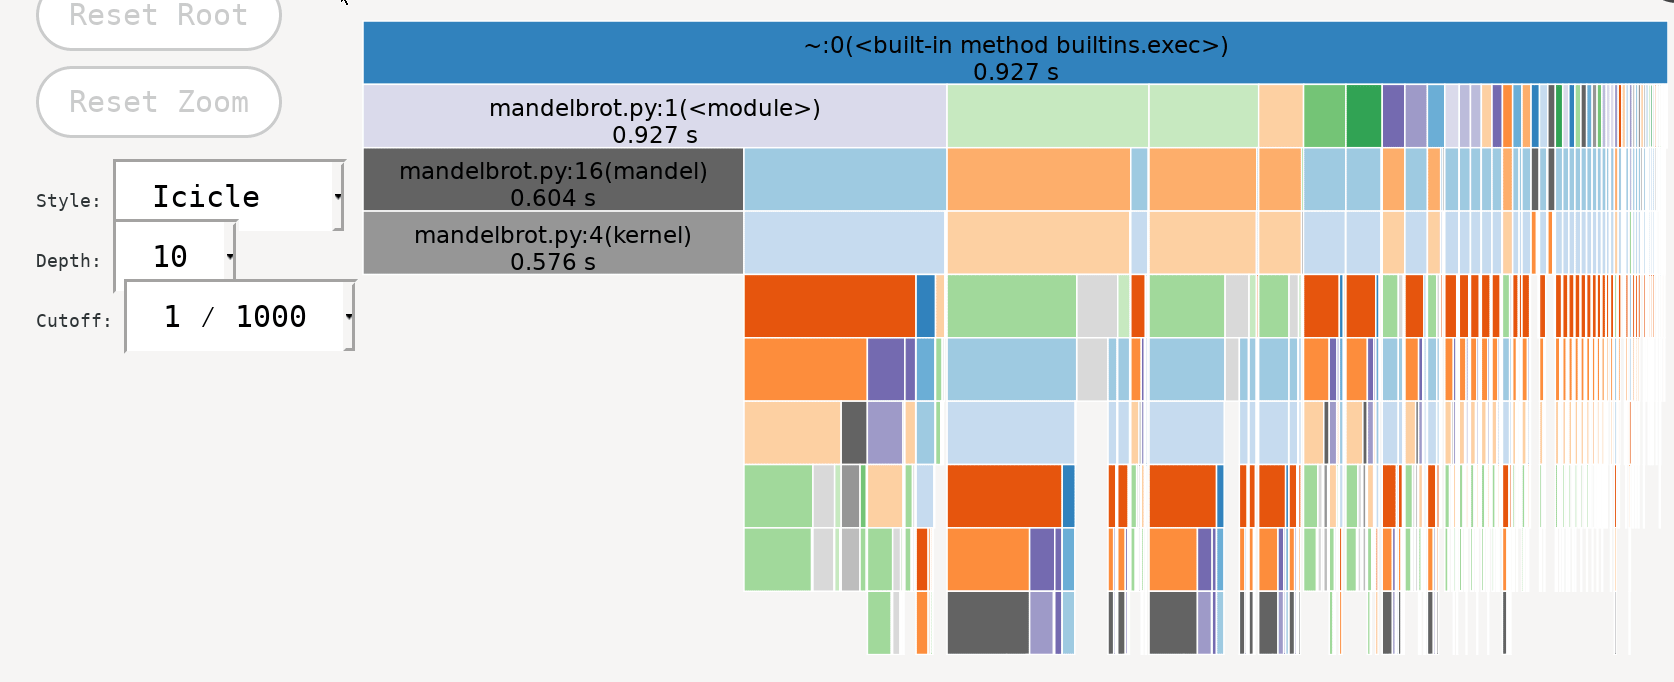 Exploration of profiling results with snakeviz